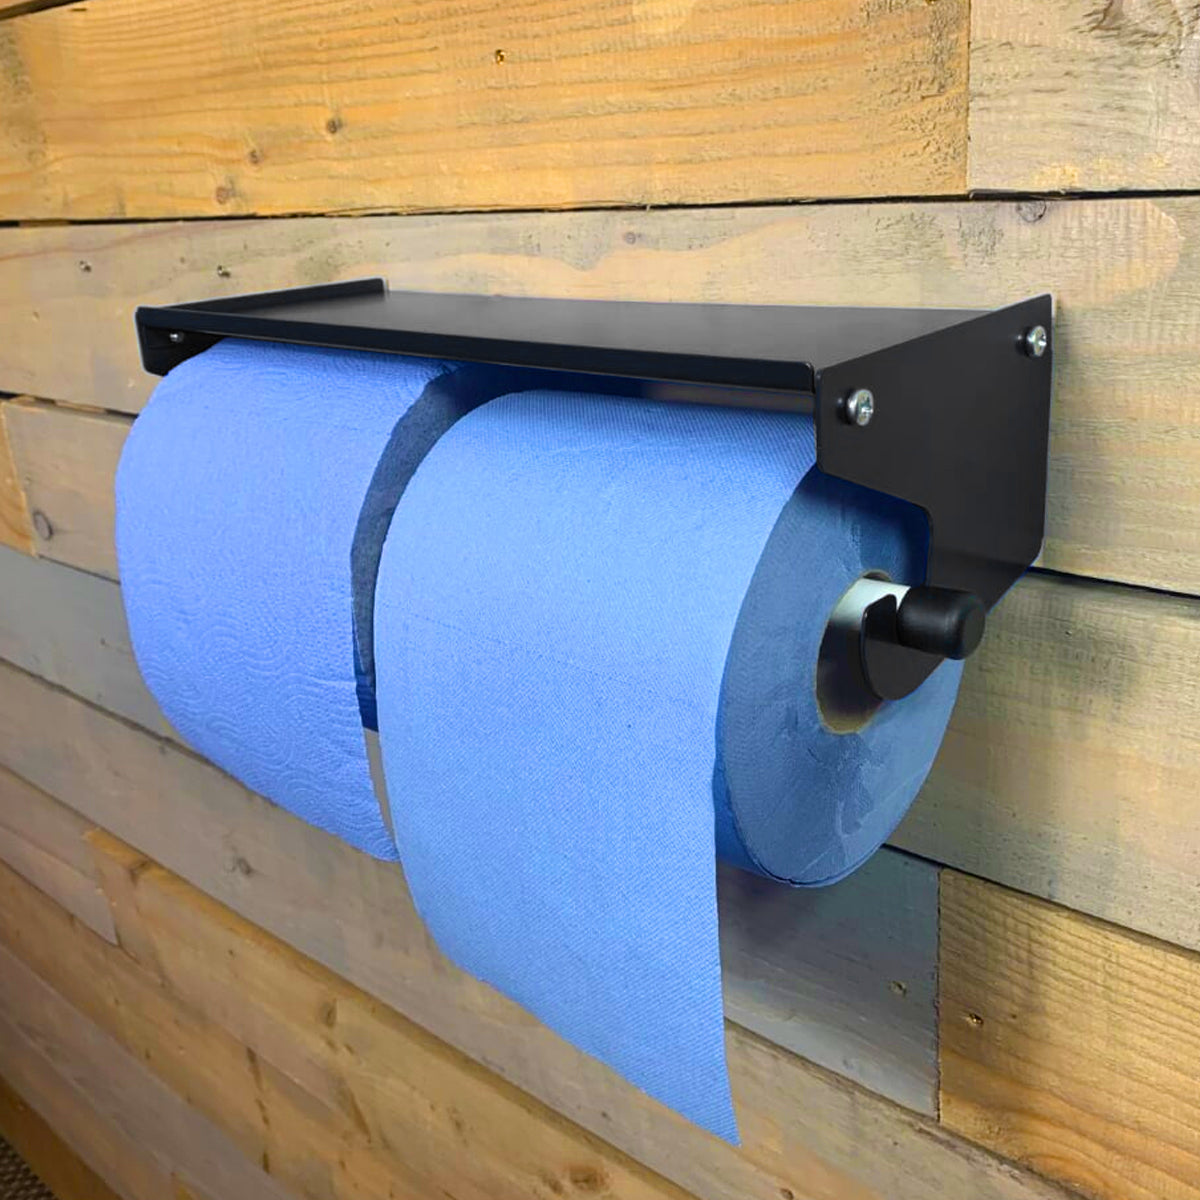 MegaMaxx UK™ Dual Blue Roll & Paper Towel Holder with Shelf - Indoor Outdoors